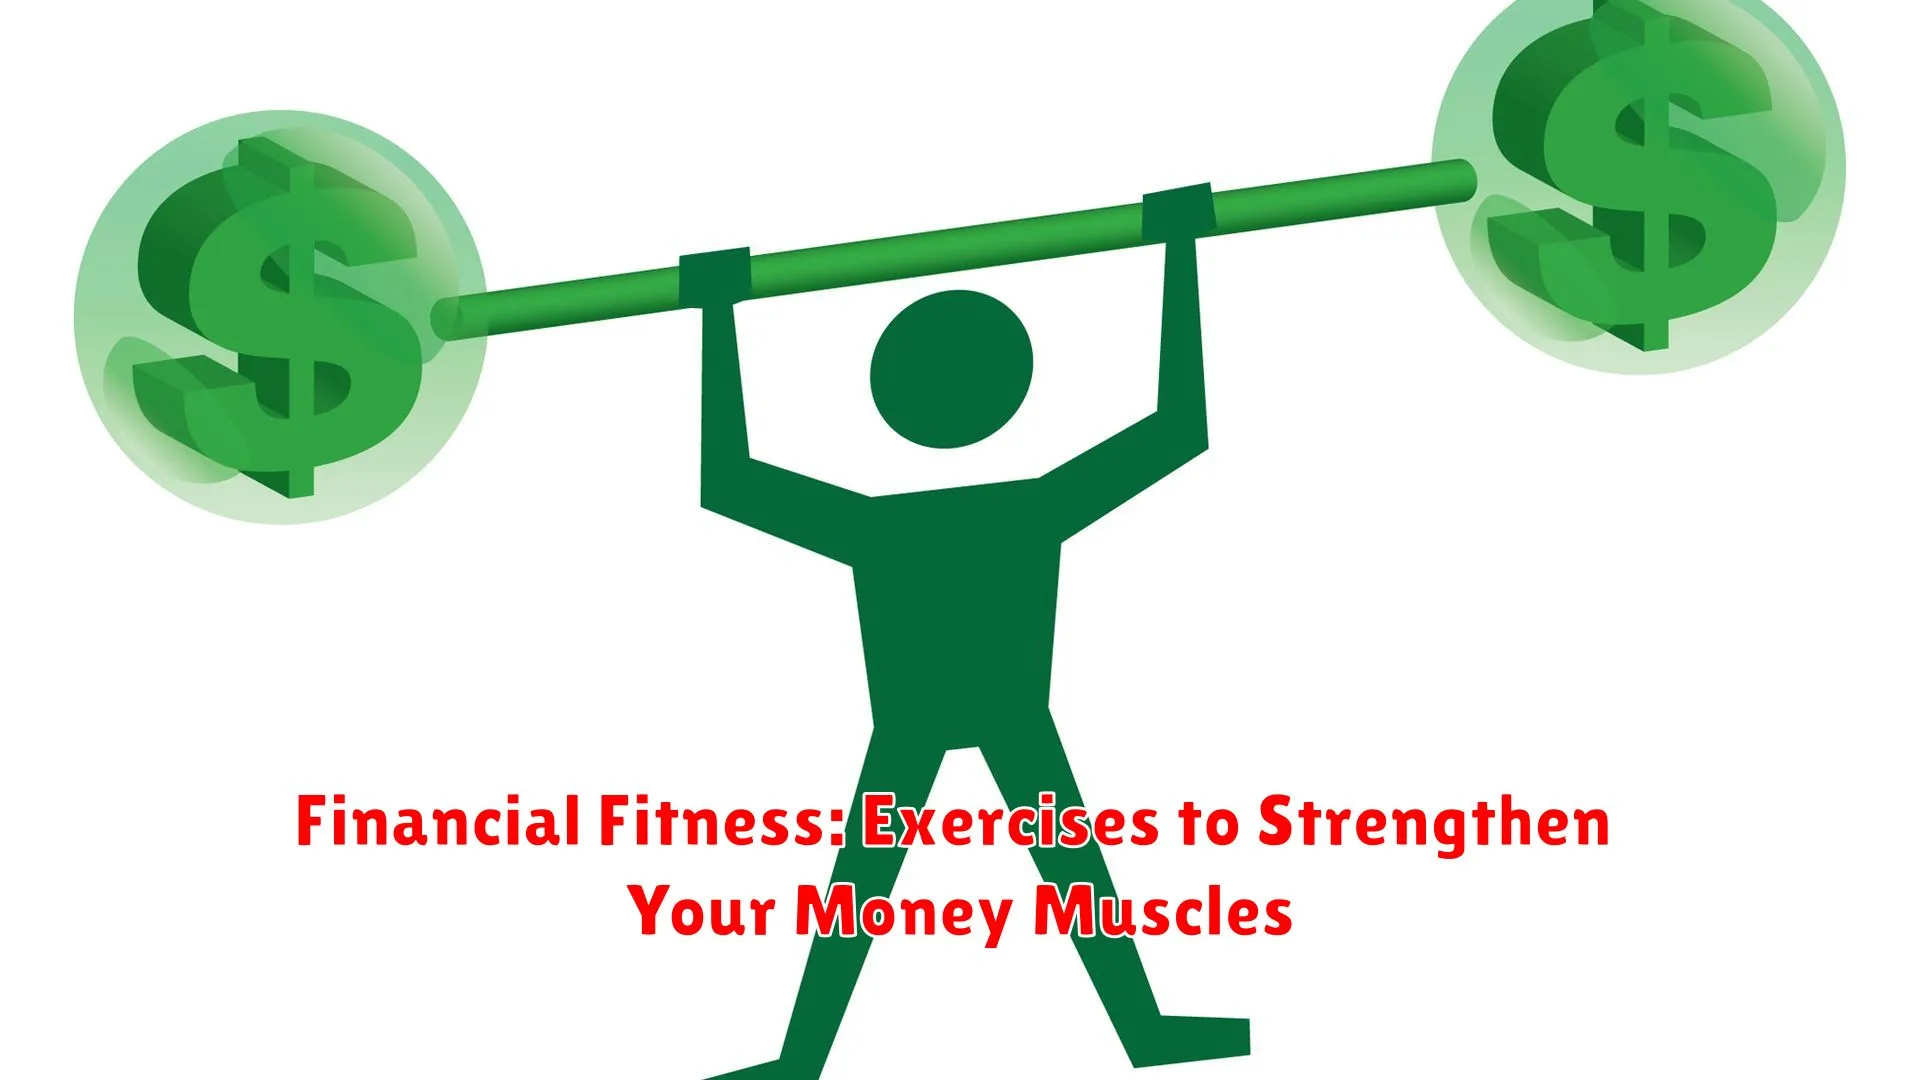 Financial Fitness: Exercises to Strengthen Your Money Muscles